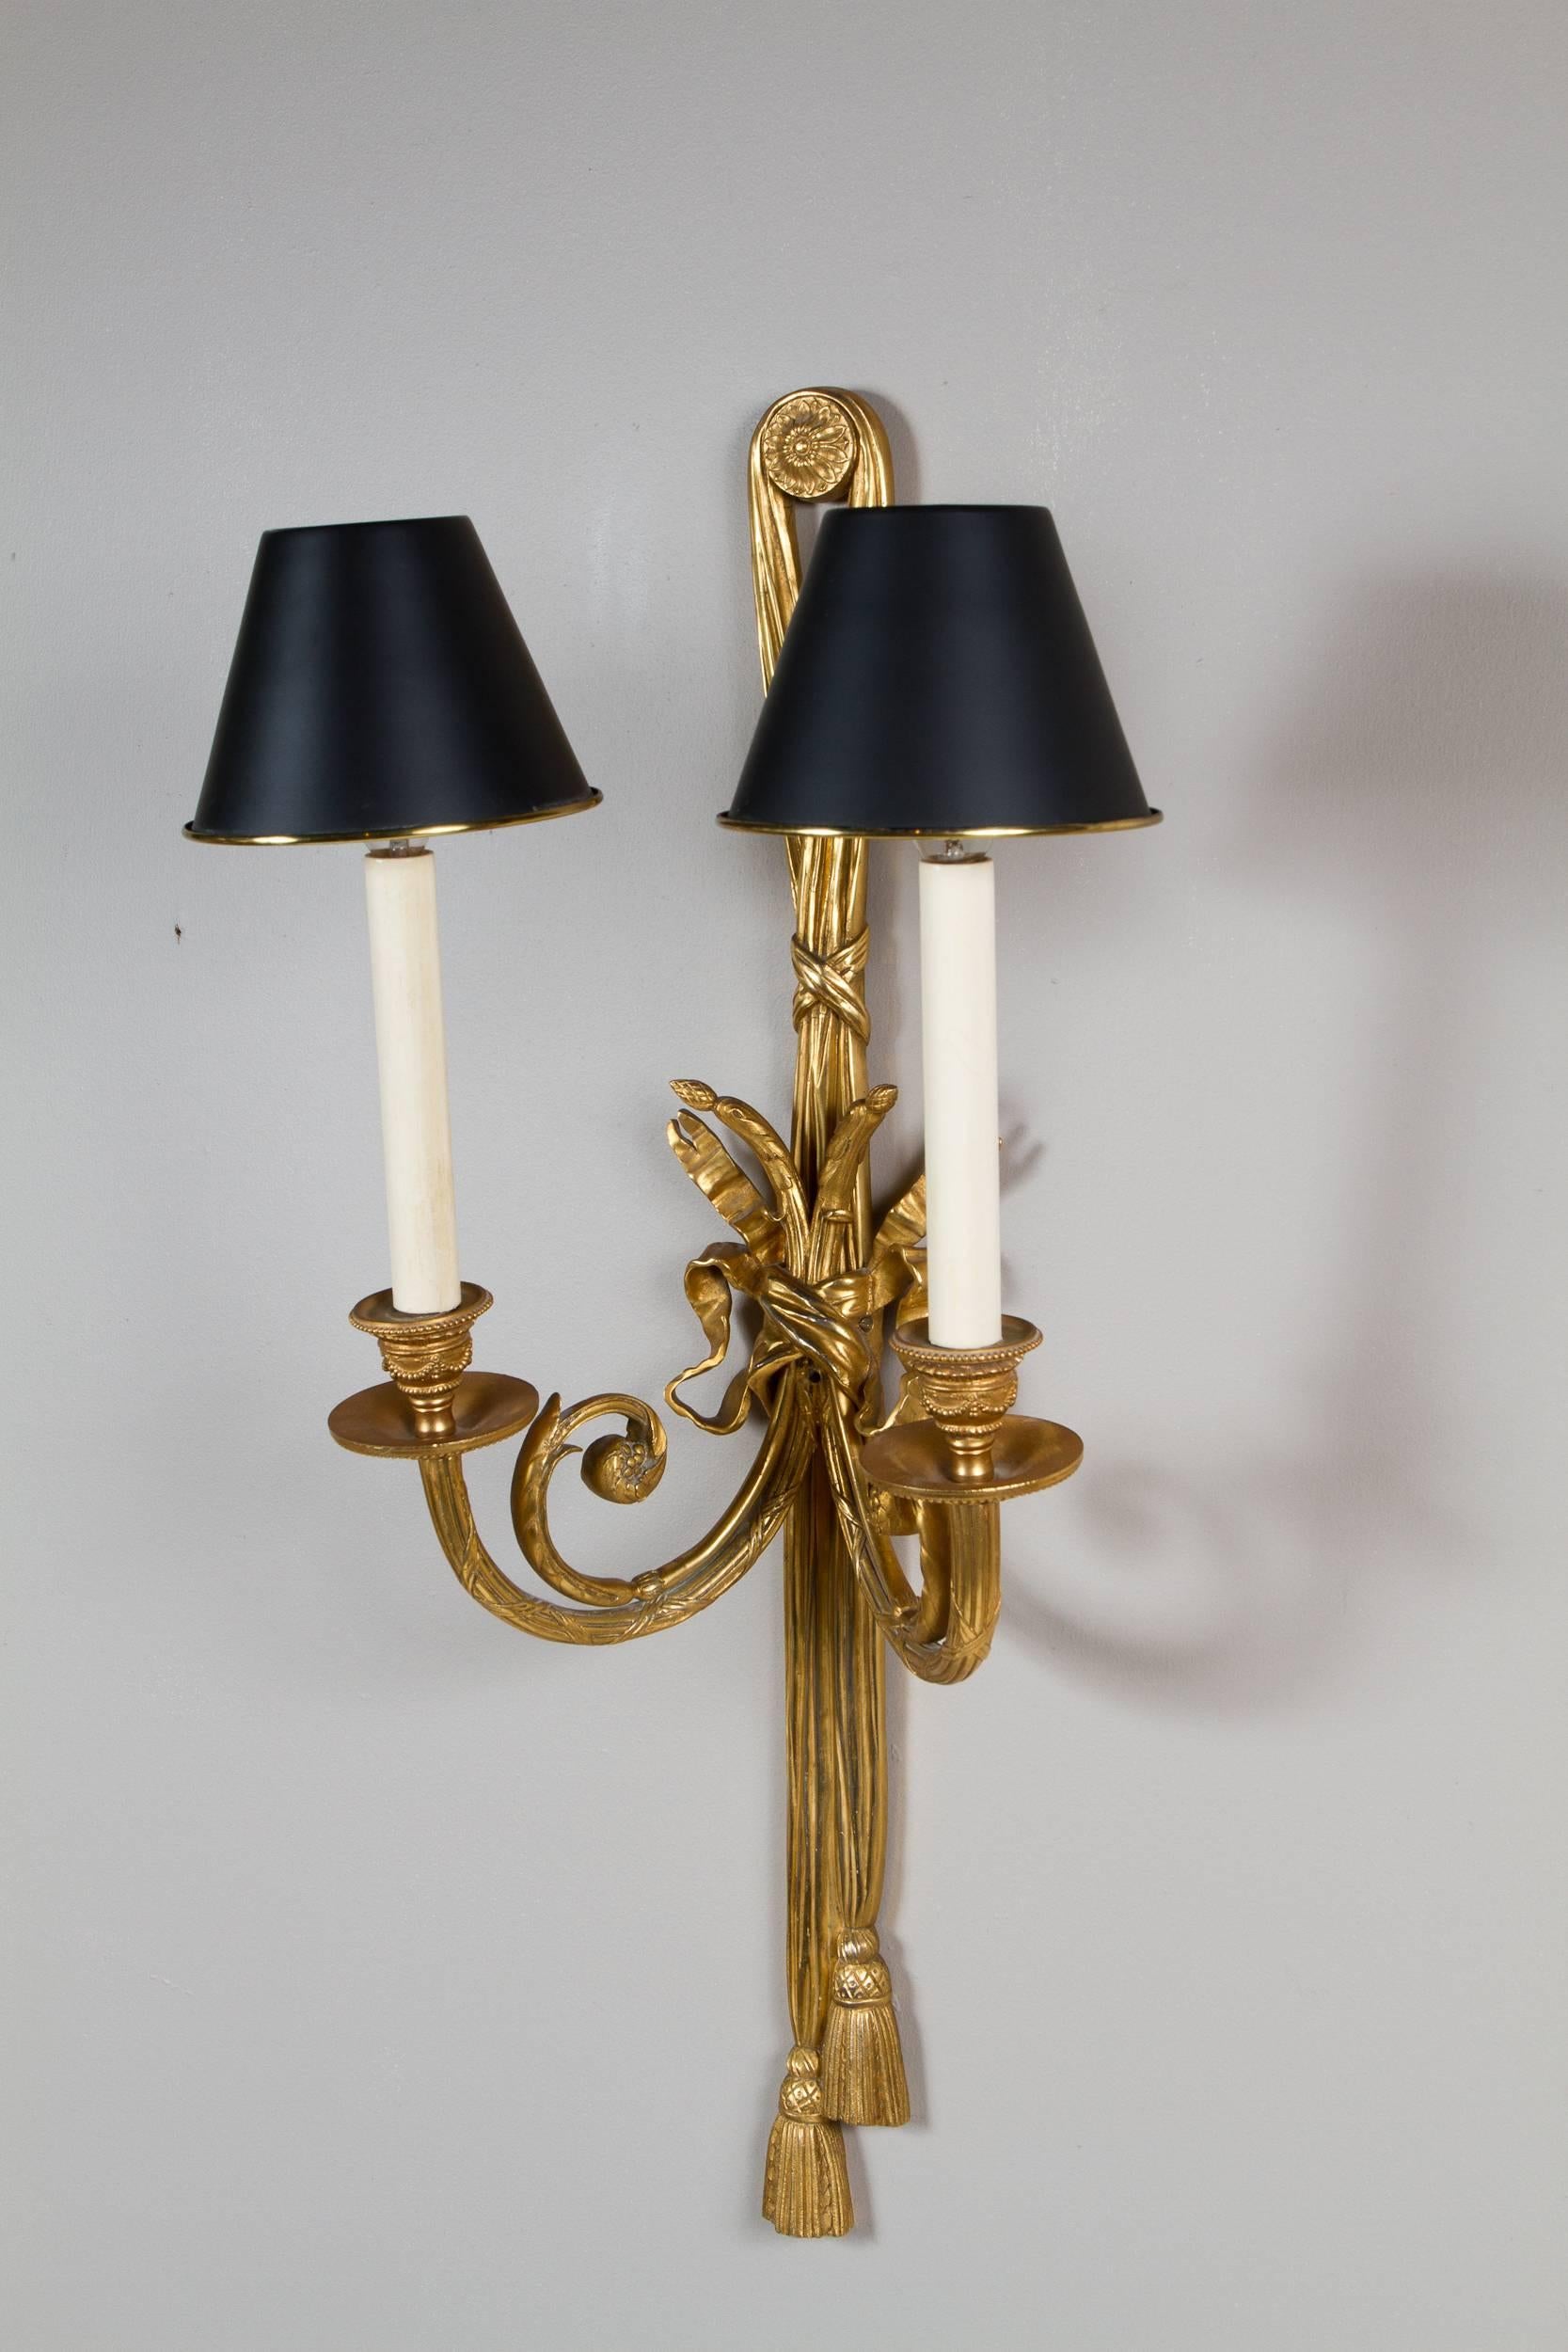 Great pair of Louis XVI style gilt bronze sconces, fitted with black metal shades, France, circa 1900.